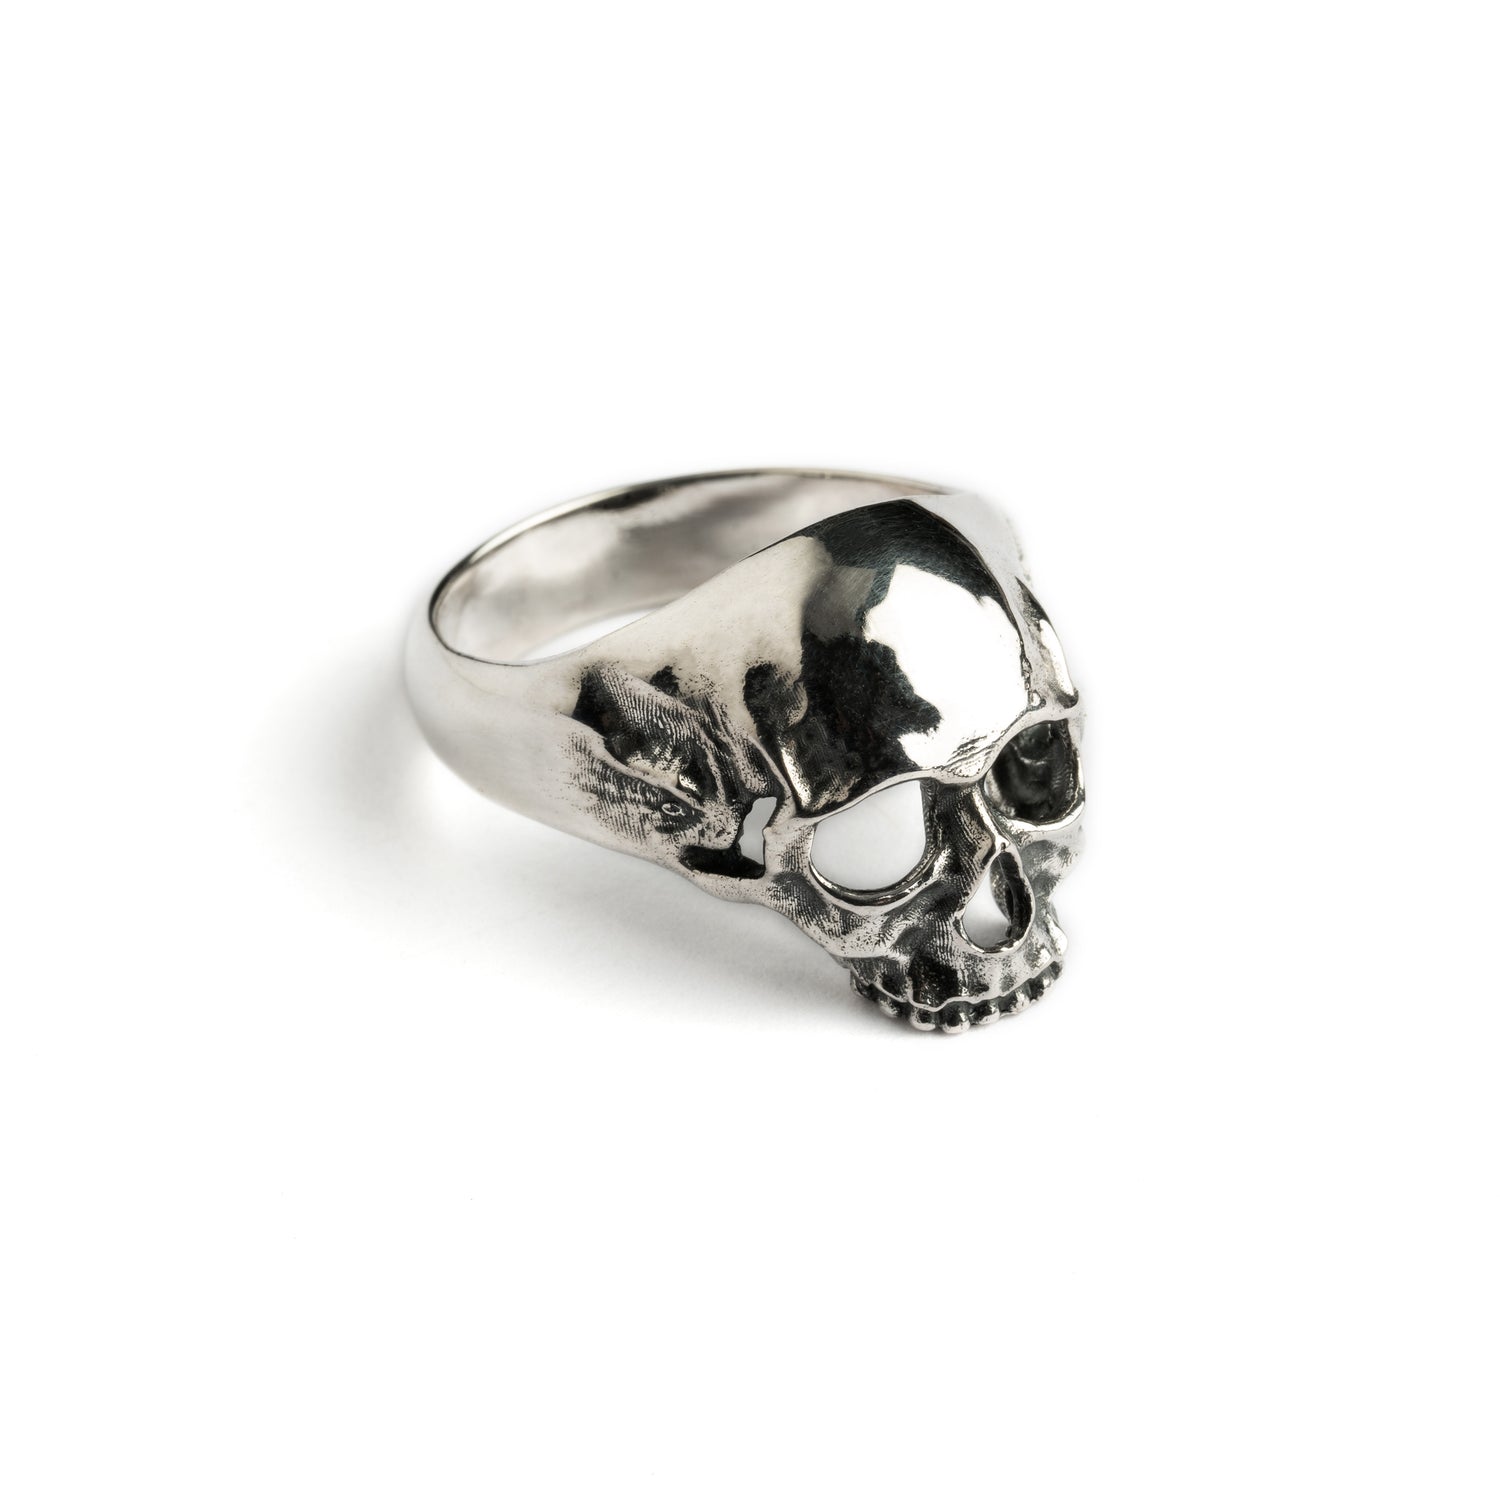 Silver Immortal Skull Ring above side view